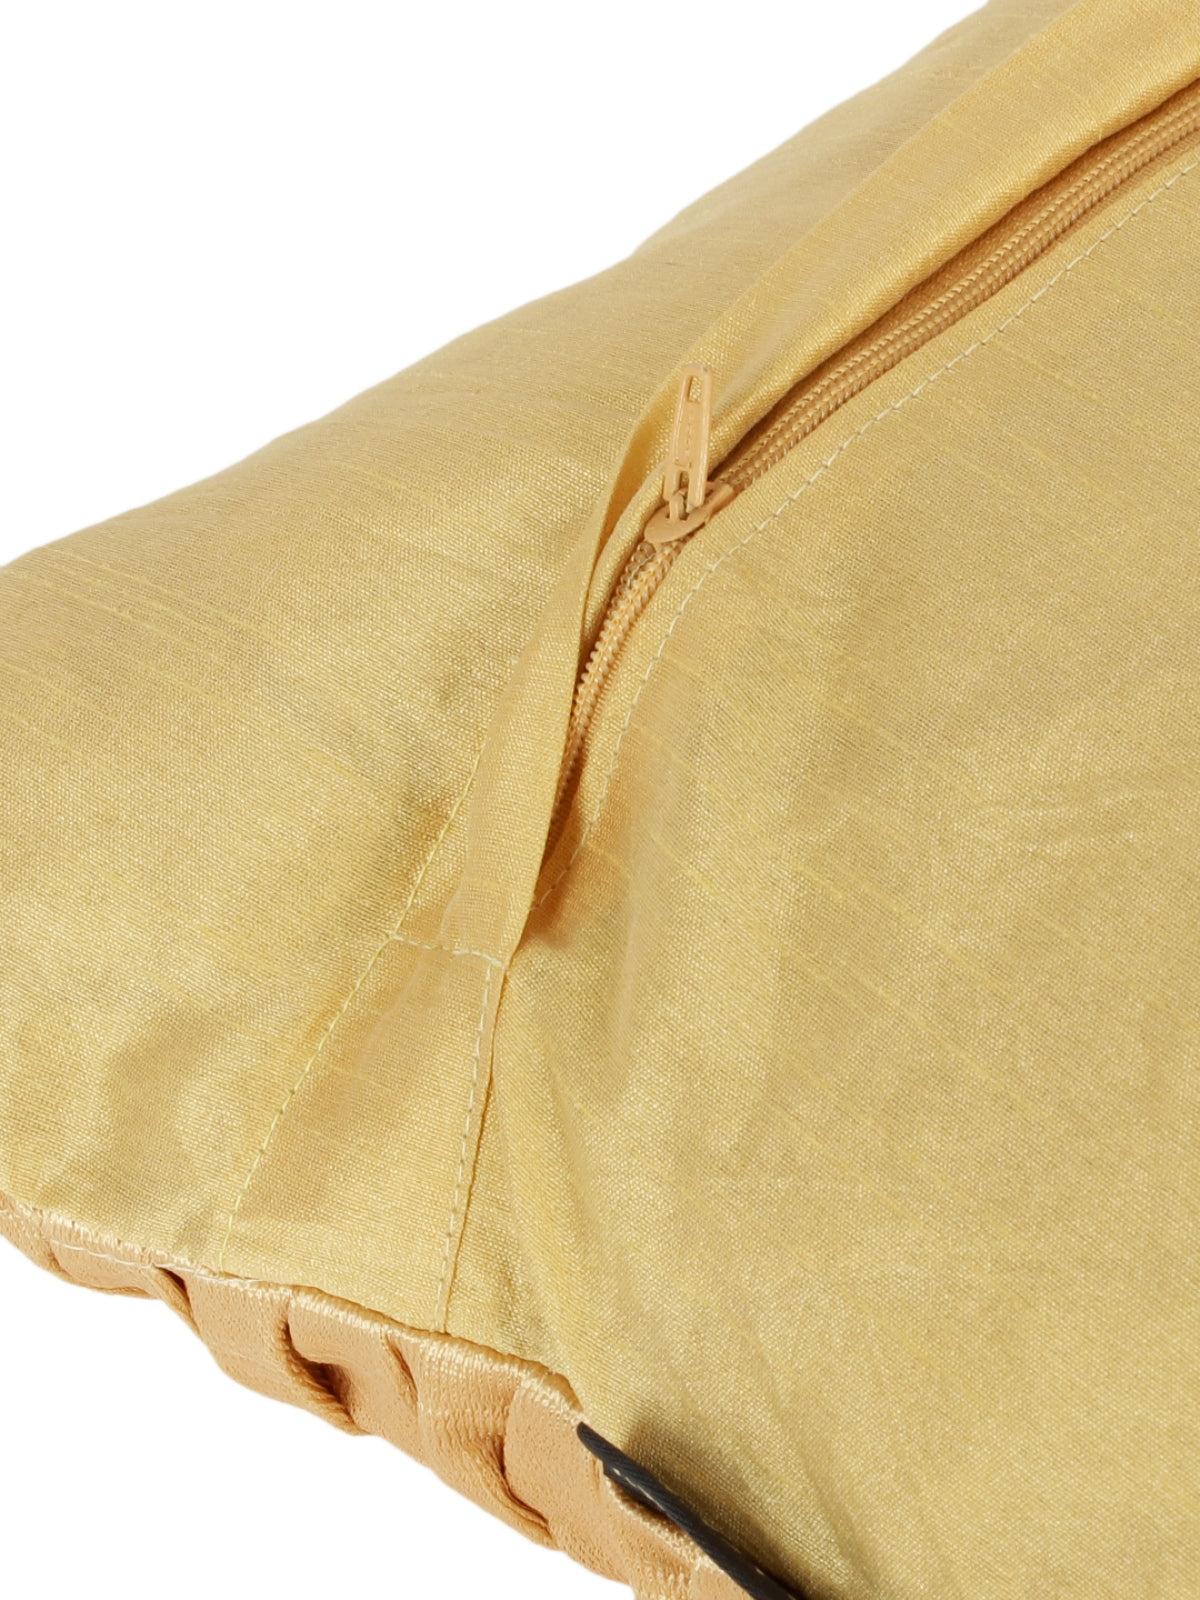 Soft Polyester Chenille Designer Plain Cushion Covers 16 inch x 16 inch Set of 2 - Beige